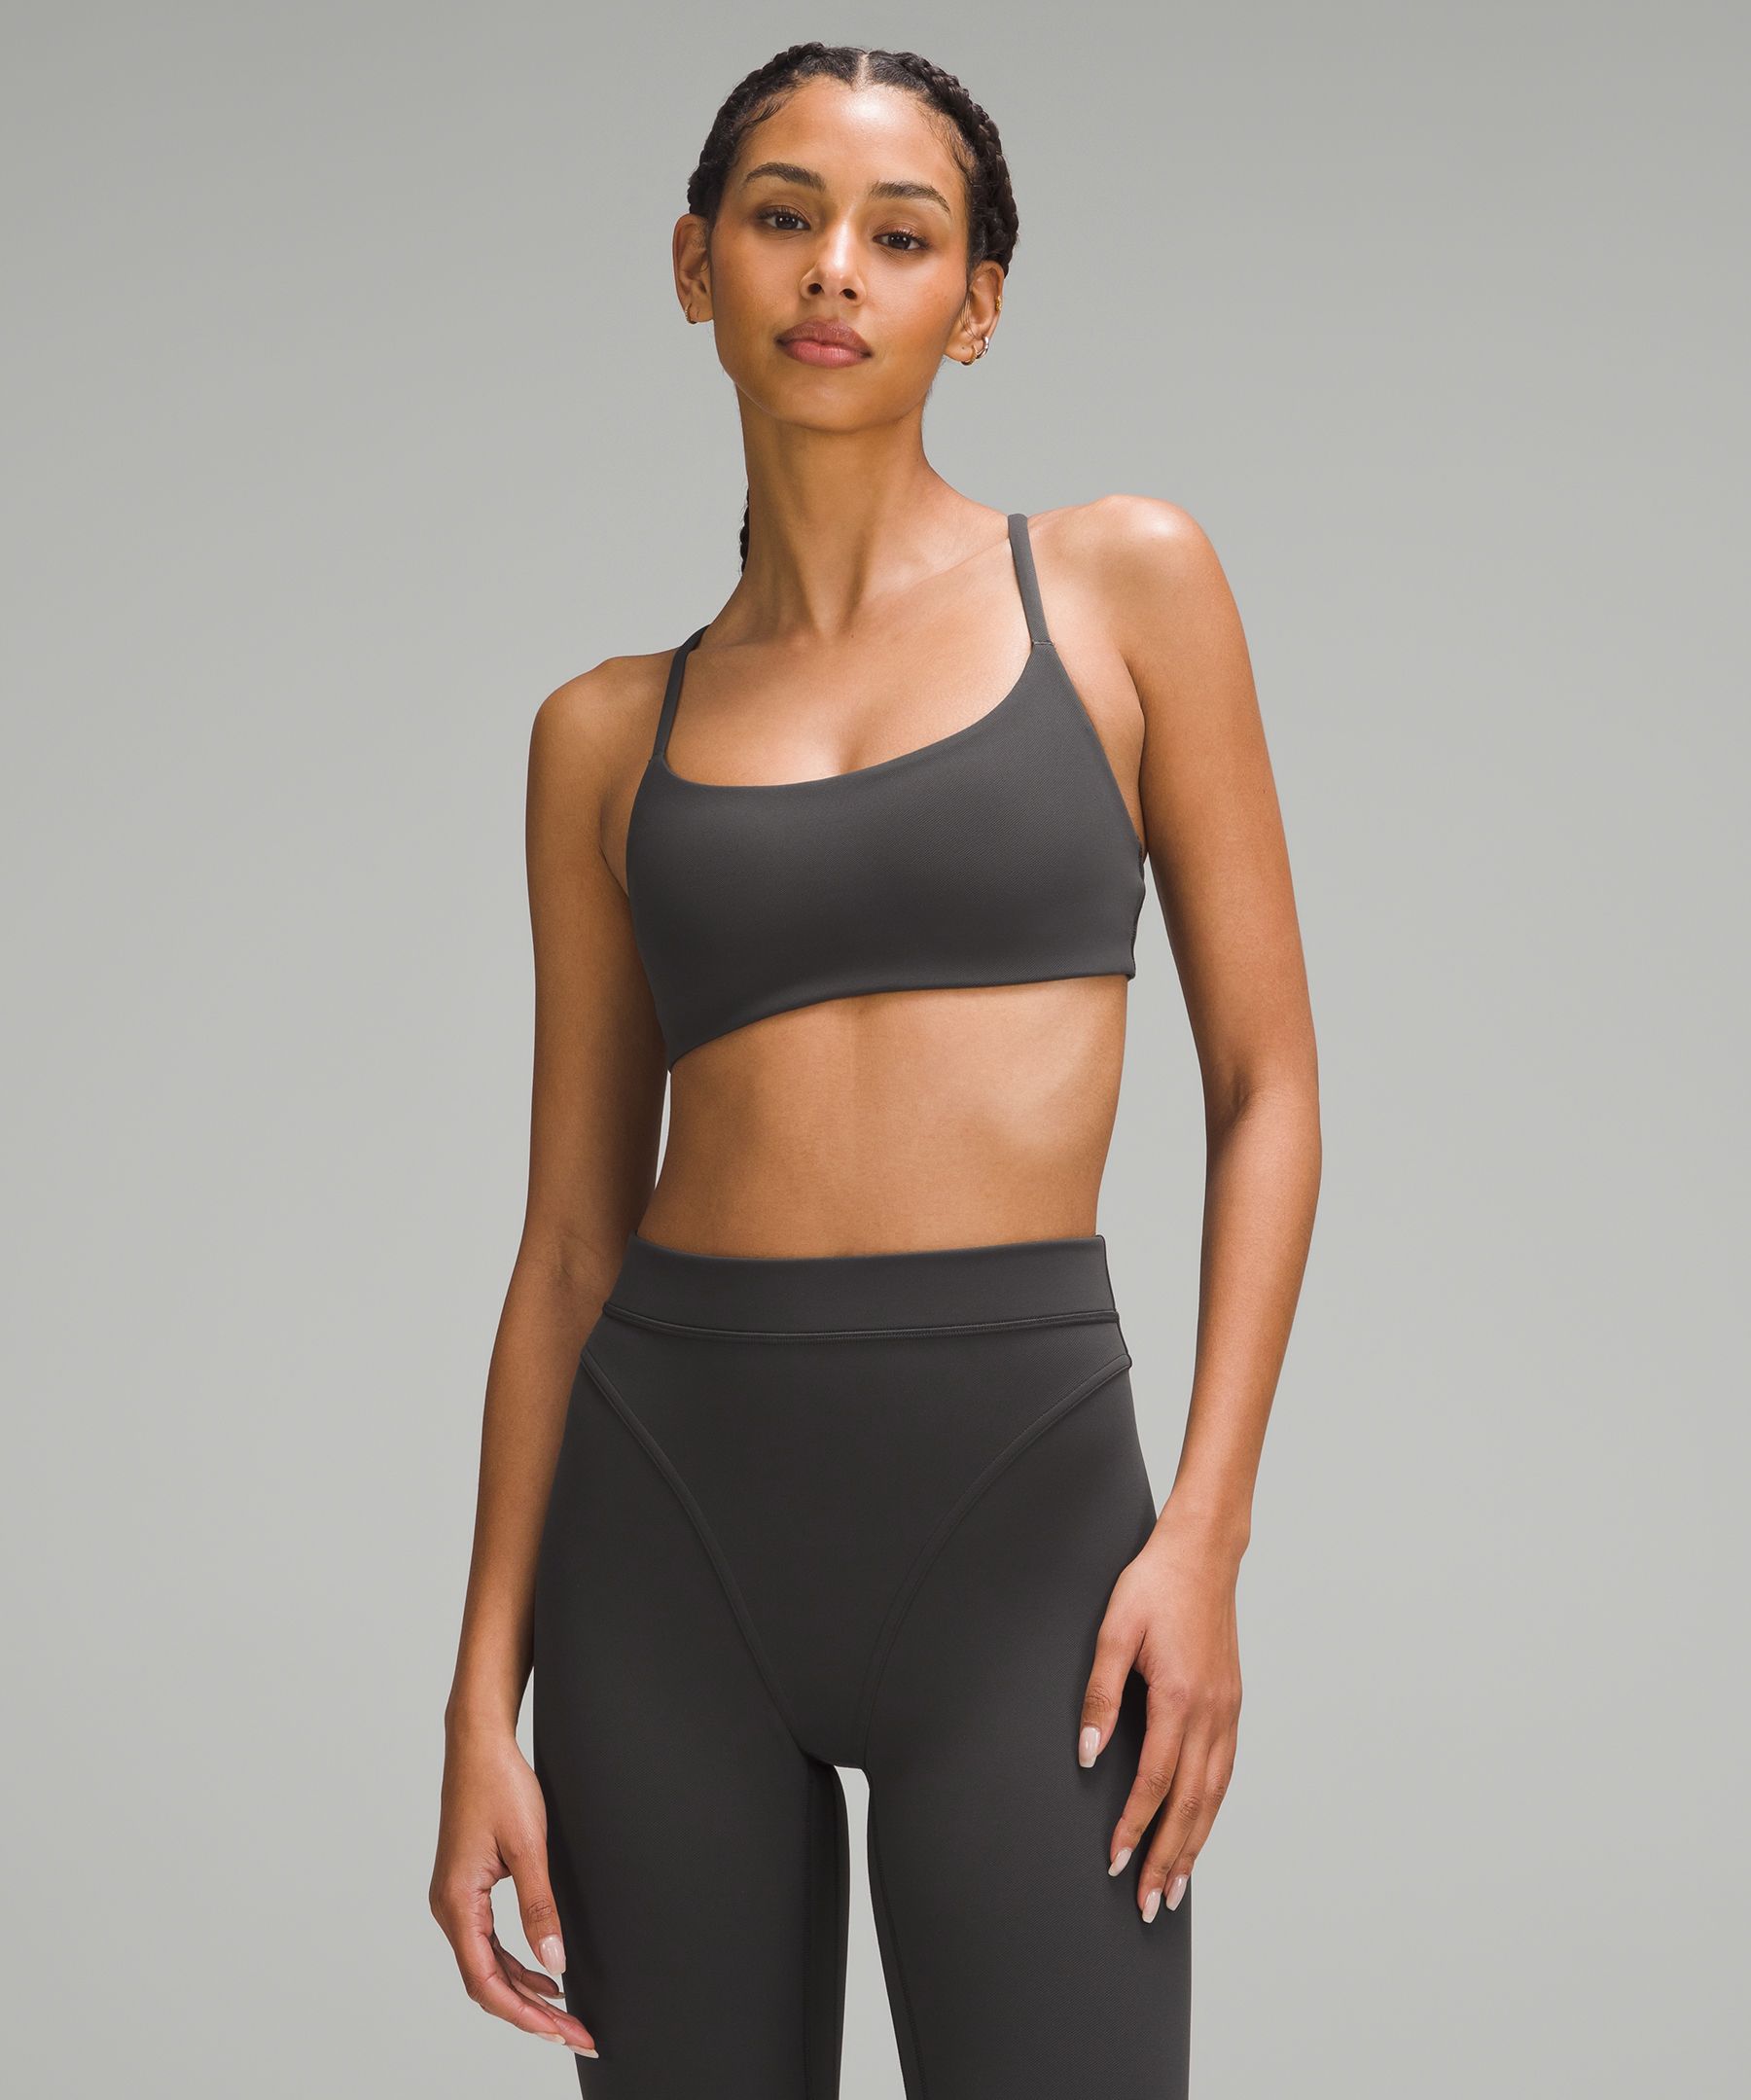 Lululemon Wunder Train Strappy Racer Bra Light Support, A/b Cup Twill